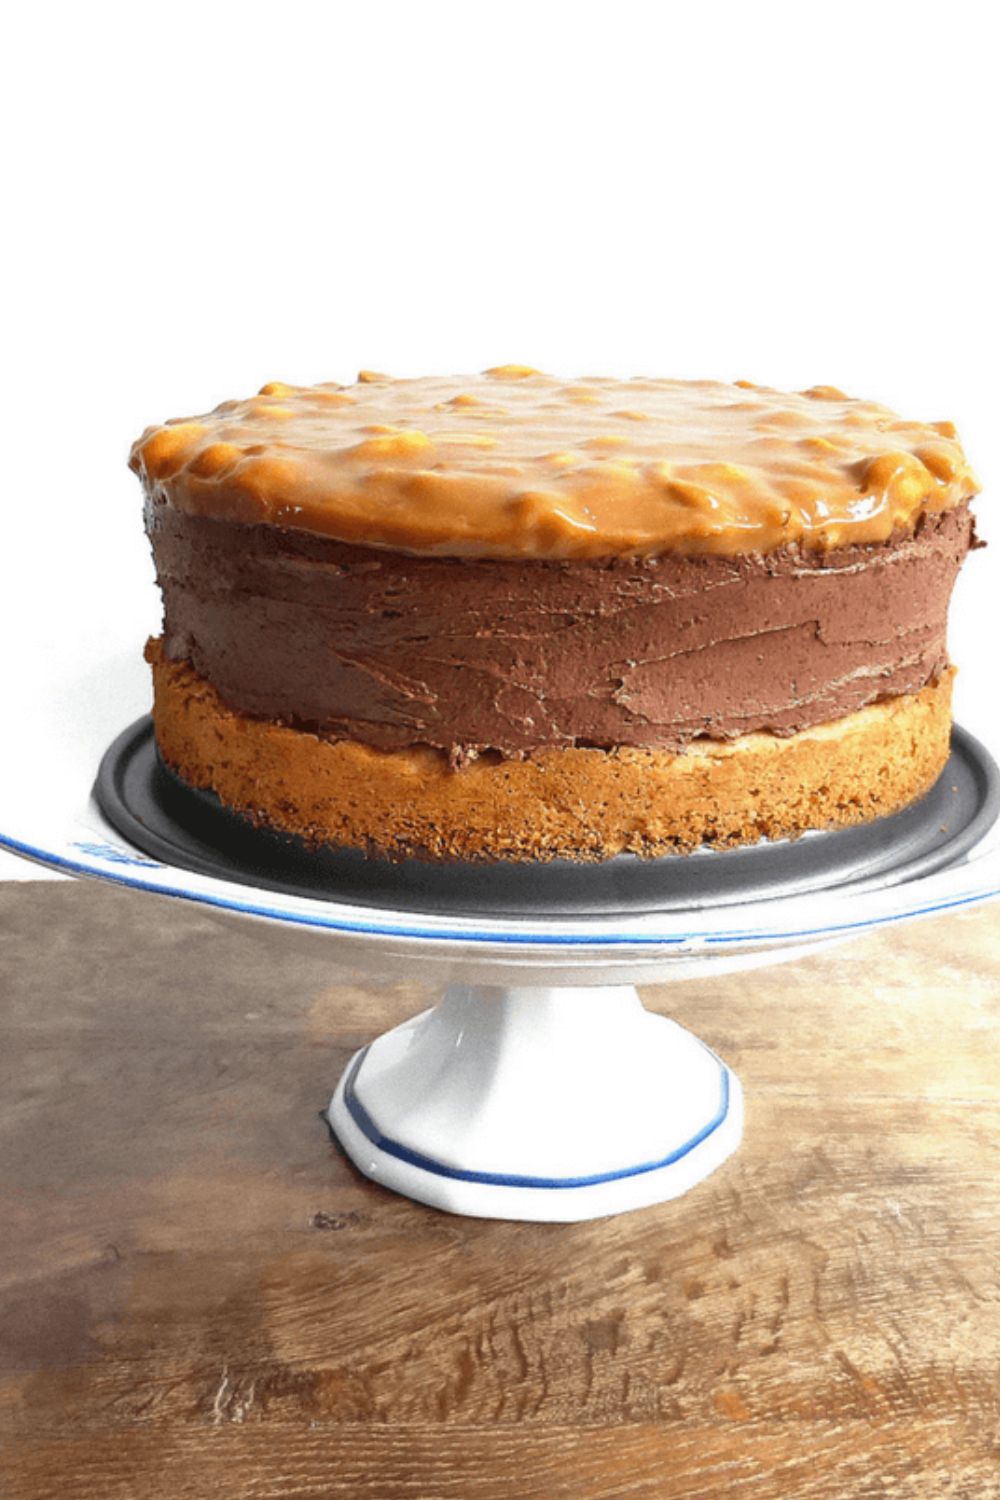 Chocolate Cheesecake with a Peanut Butter Cake Crust (and Salted Peanut Dulce de Leche Topping)